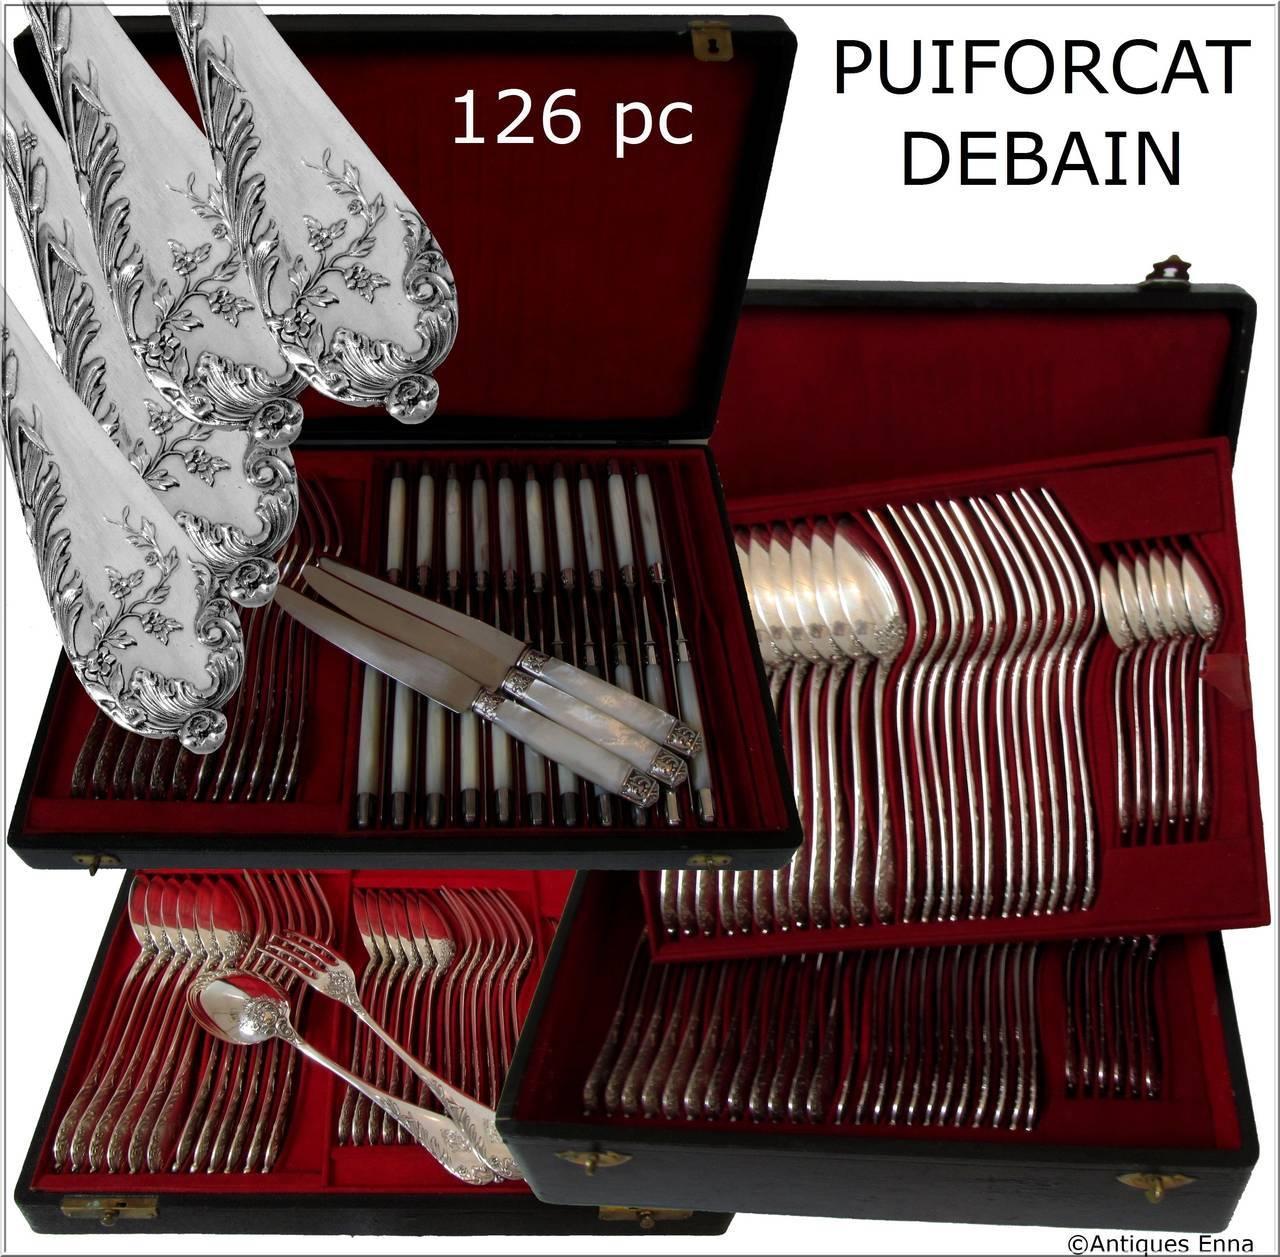 Head of Minerve 1st titre for 950/1000 French sterling silver guarantee.

Fabulous French sterling silver flatware 126 pieces with fantastic decoration in the Art Nouveau style. This flatware is presented in three storage chests.

Two prestigious